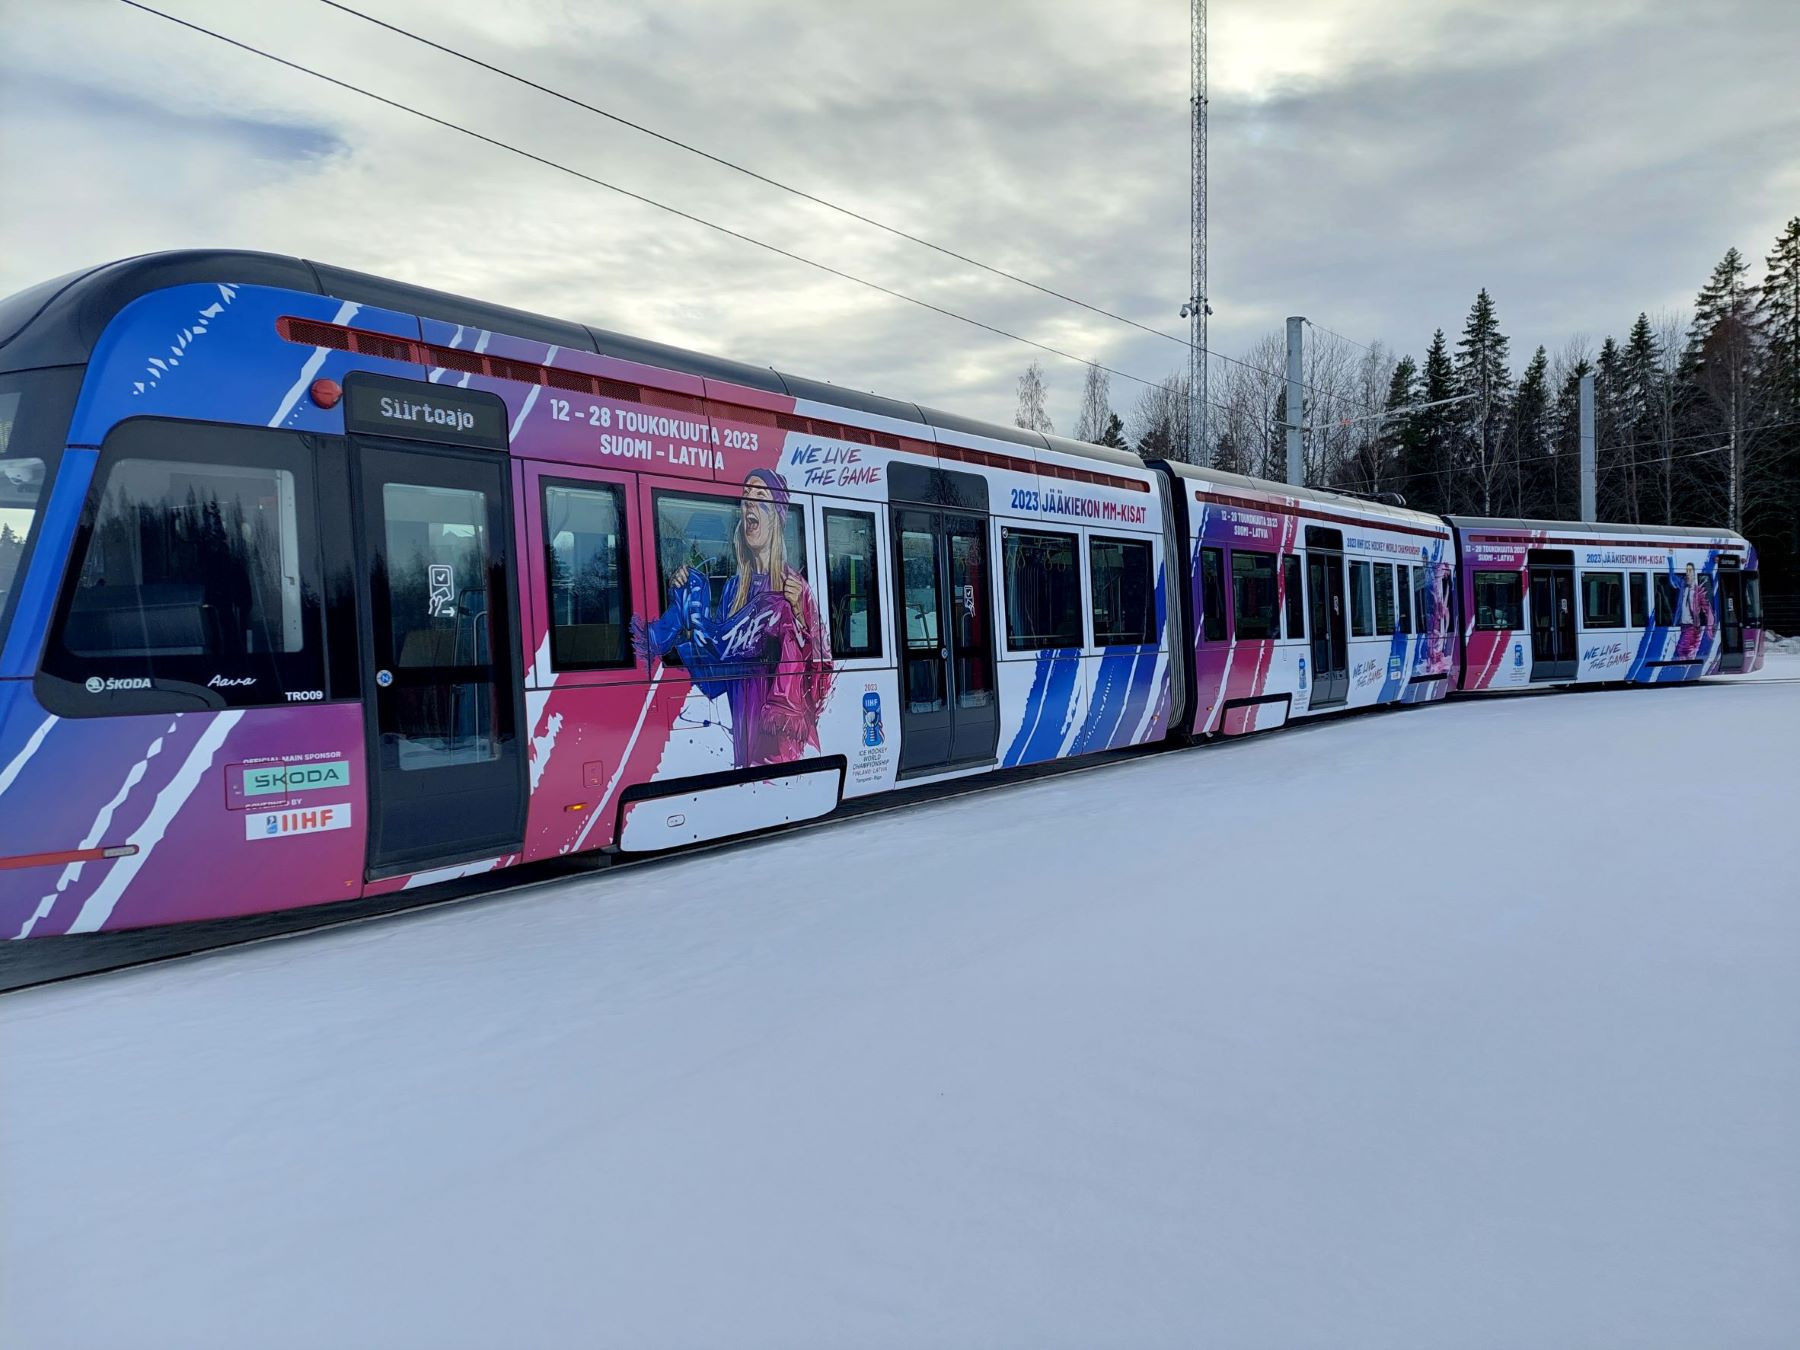 A tram in Tampere has been decorated to promote this year's IIHF Ice Hockey World Championship ©2023 IIHF Ice Hockey World Championship Organising Committee